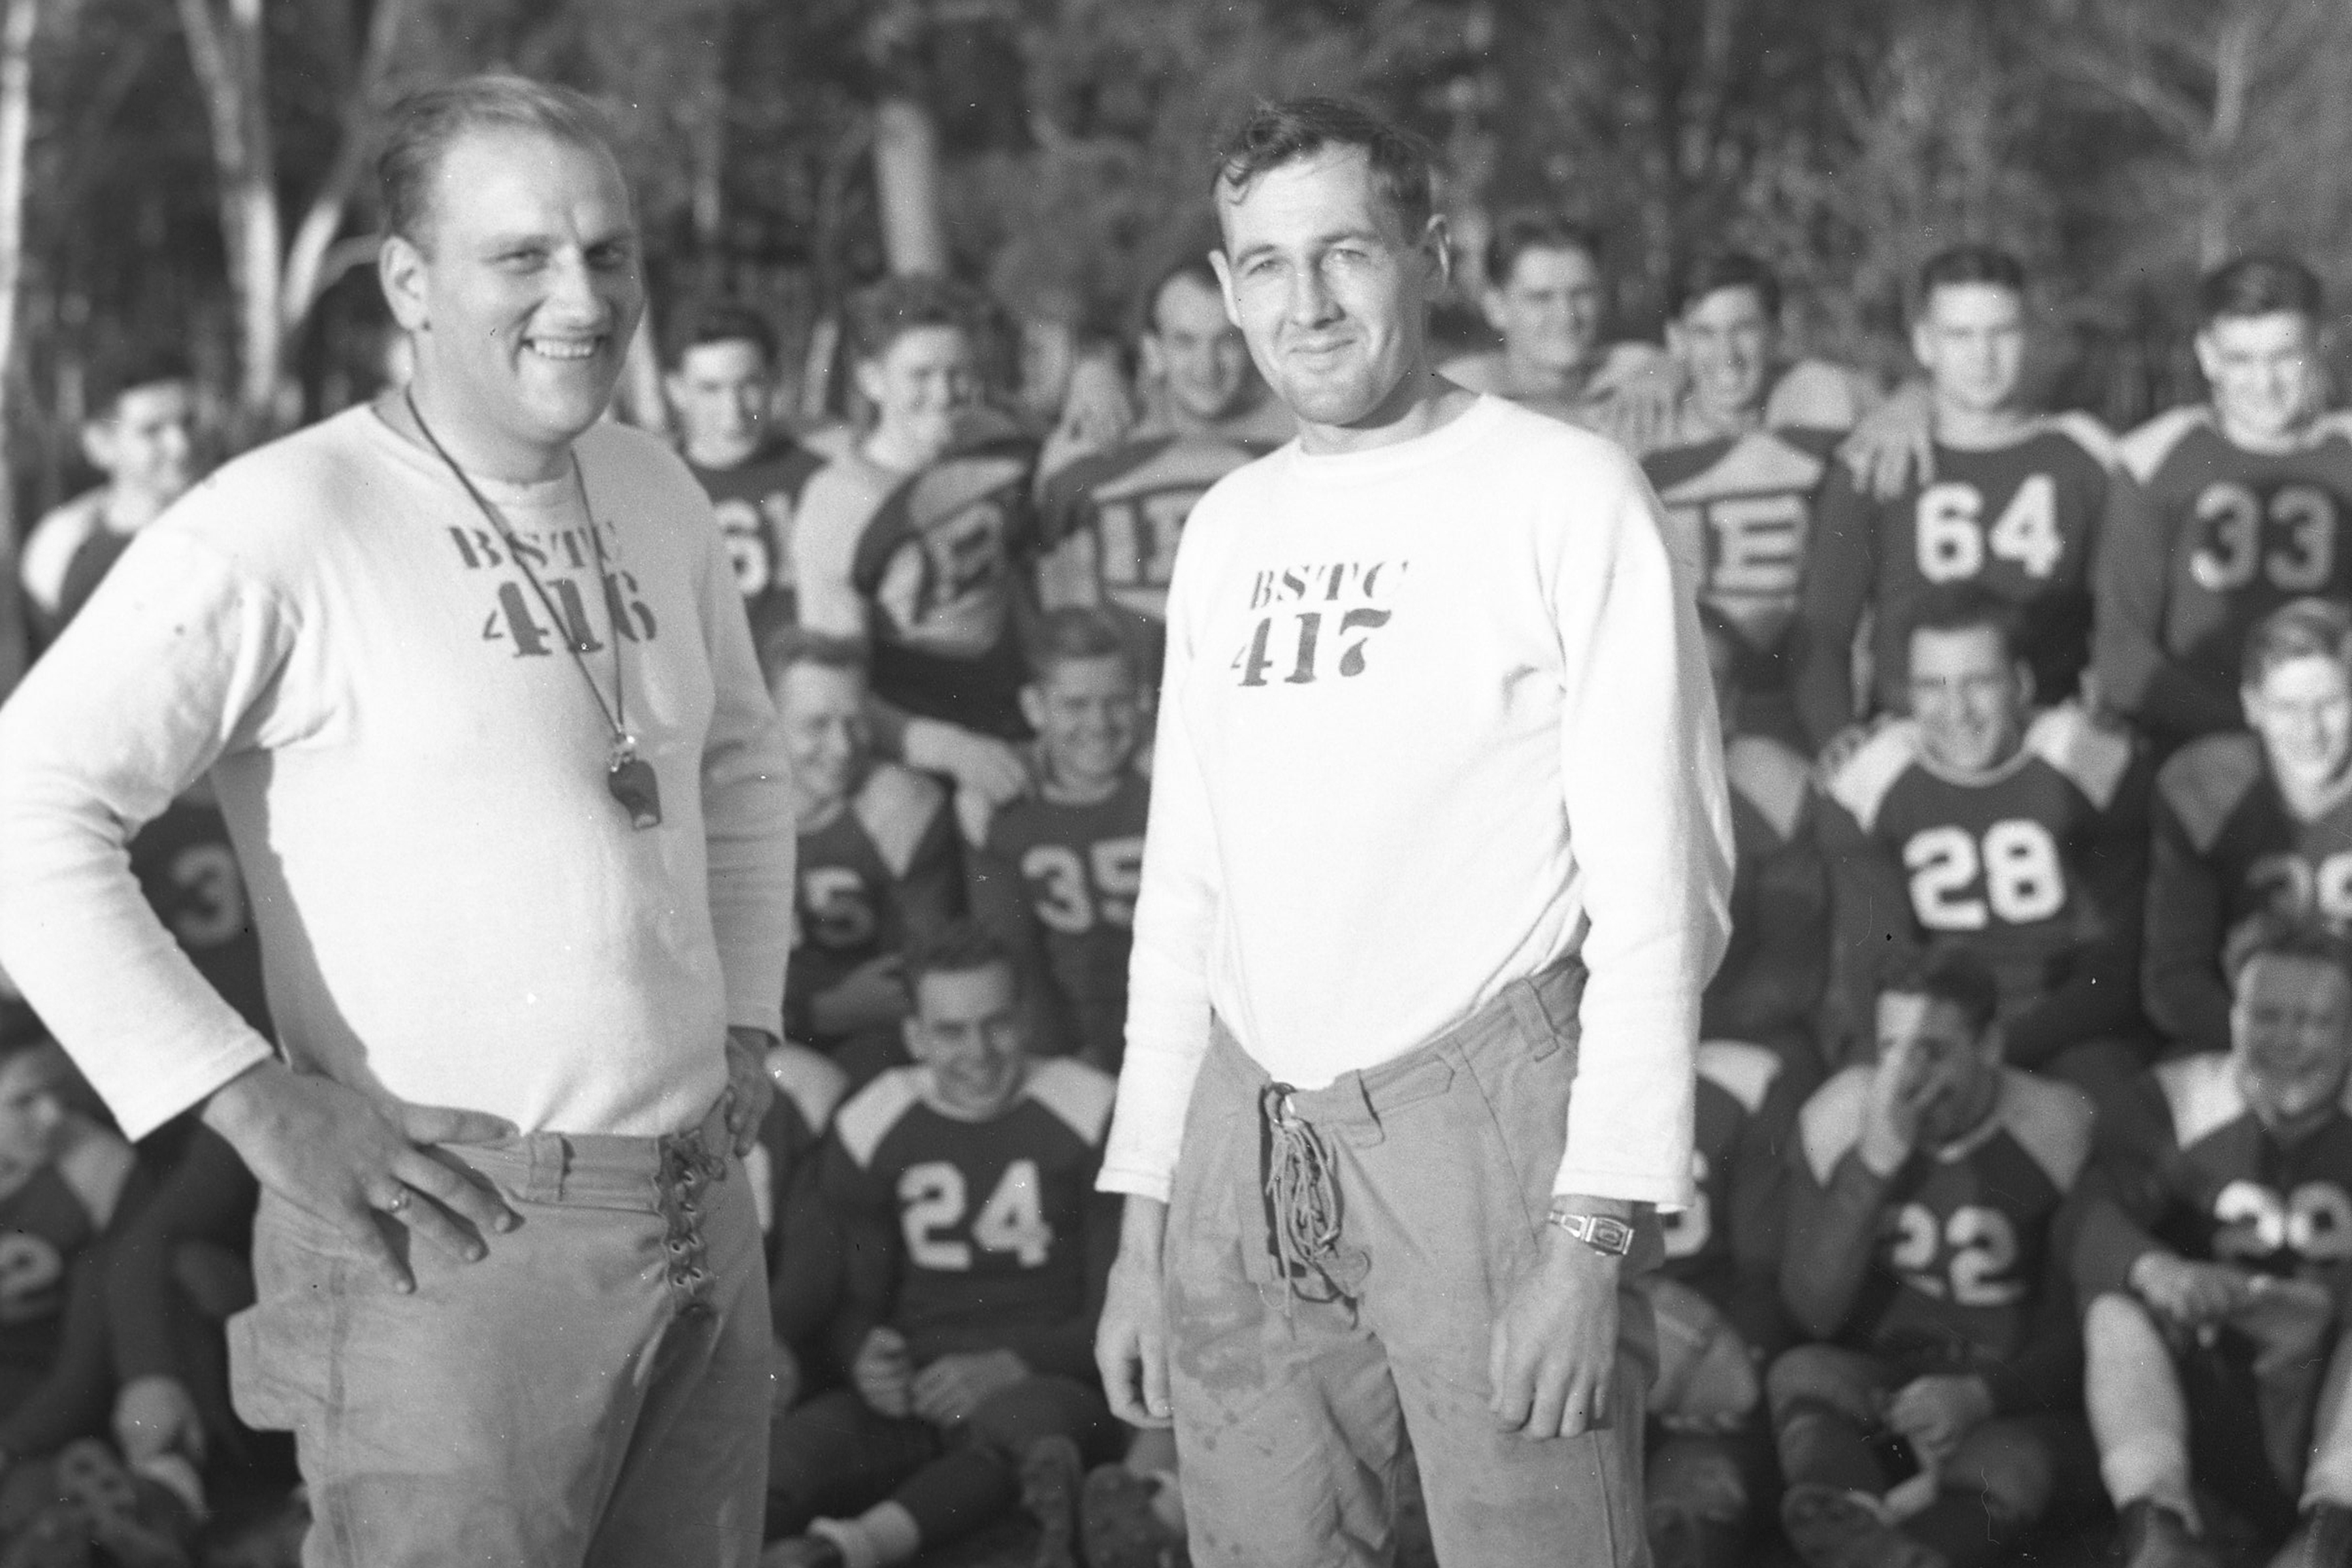 Coaches "Jolly" Erickson and Jack Frost, 1938